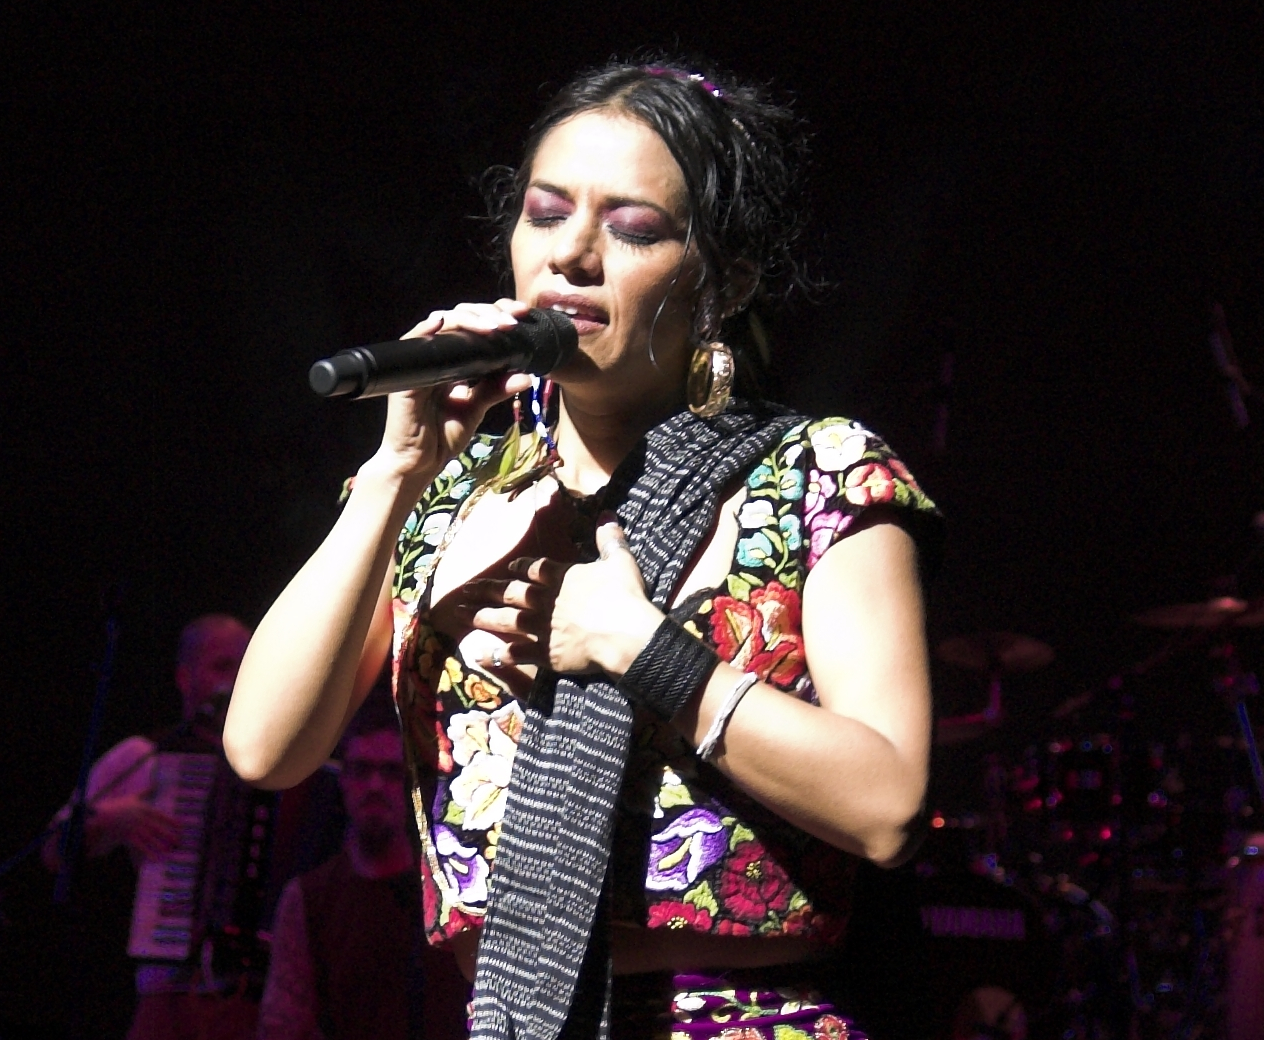 Lila Downs in a black dress with colorful flowers and a long gray scarf, holding a microphone